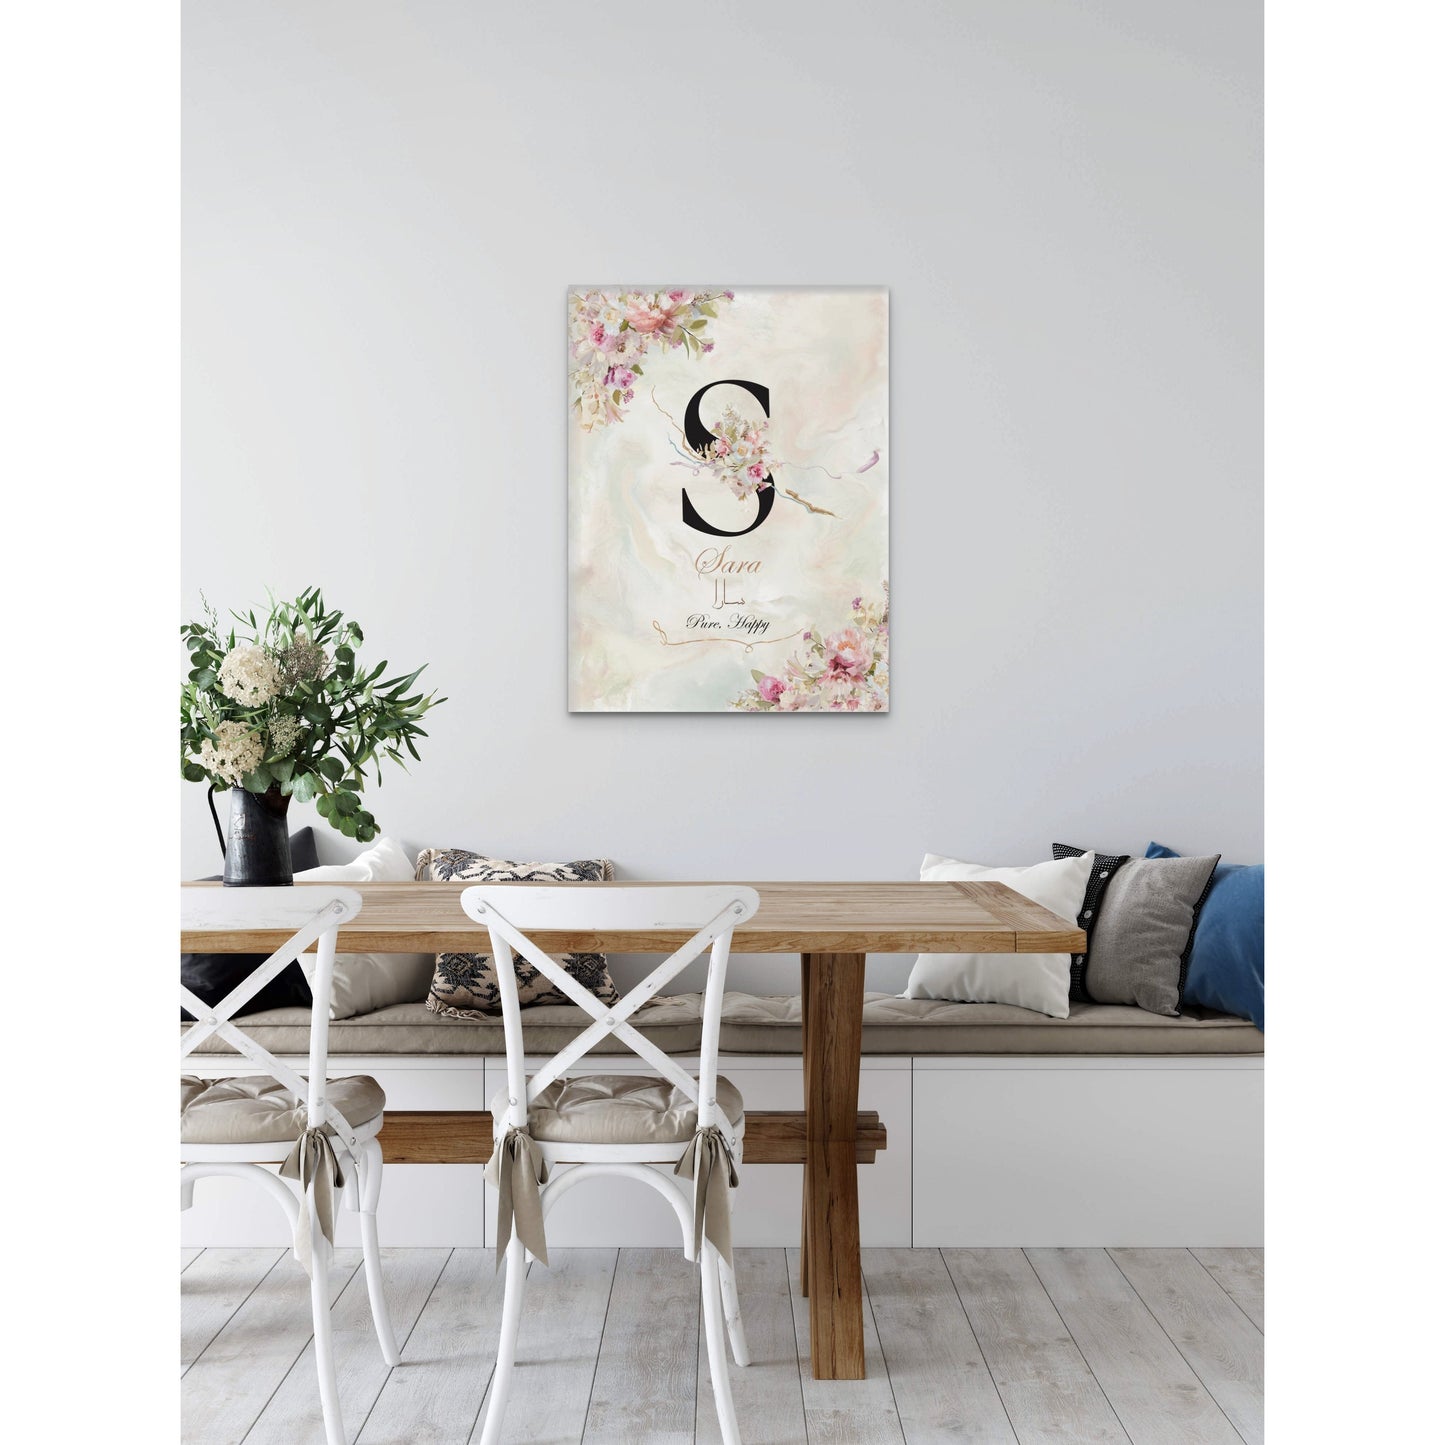 Personalisable Islamic Art for Girls: Elegance in Bloom Canvas